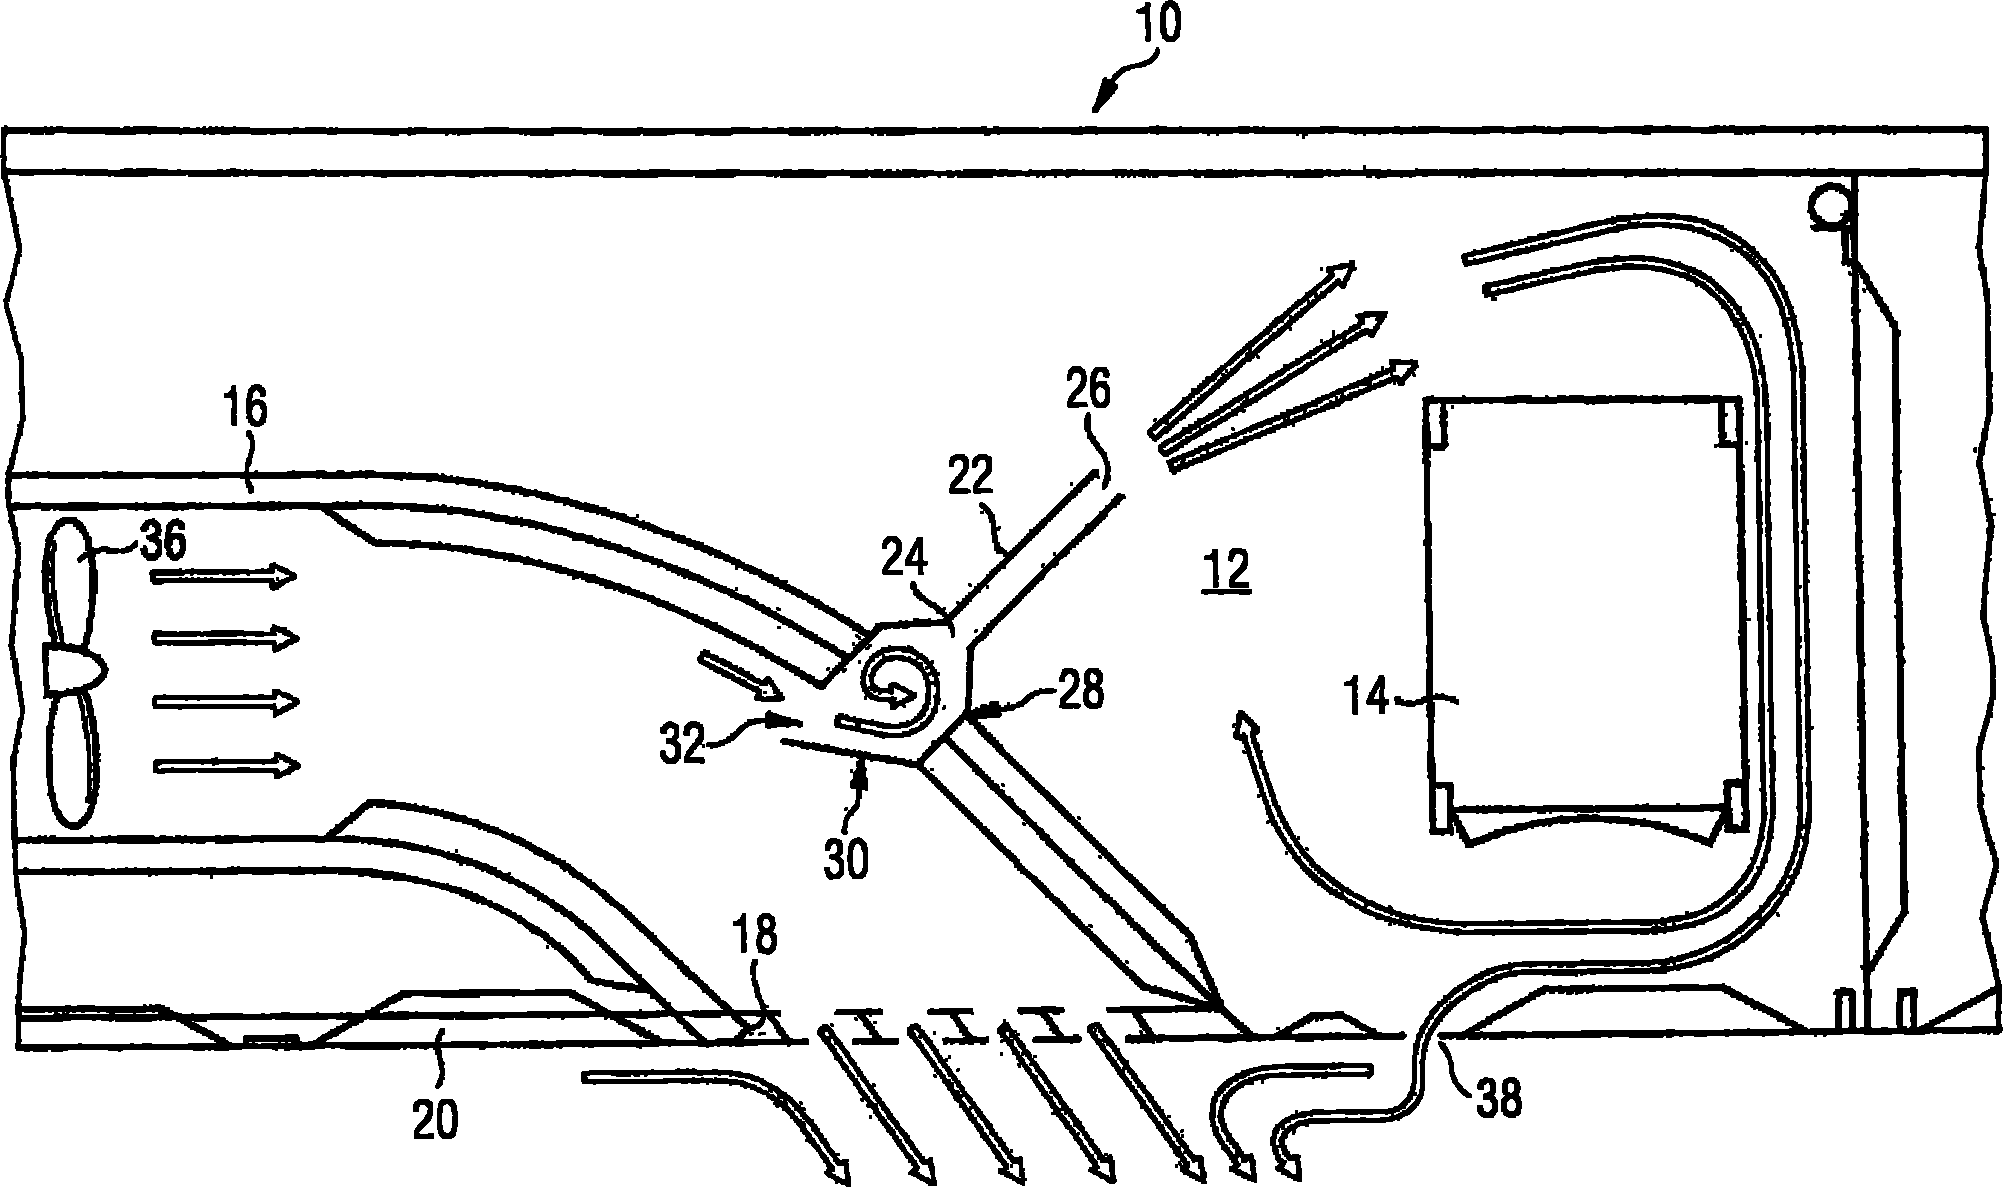 System and method for ventilating explosive regions of an aircraft